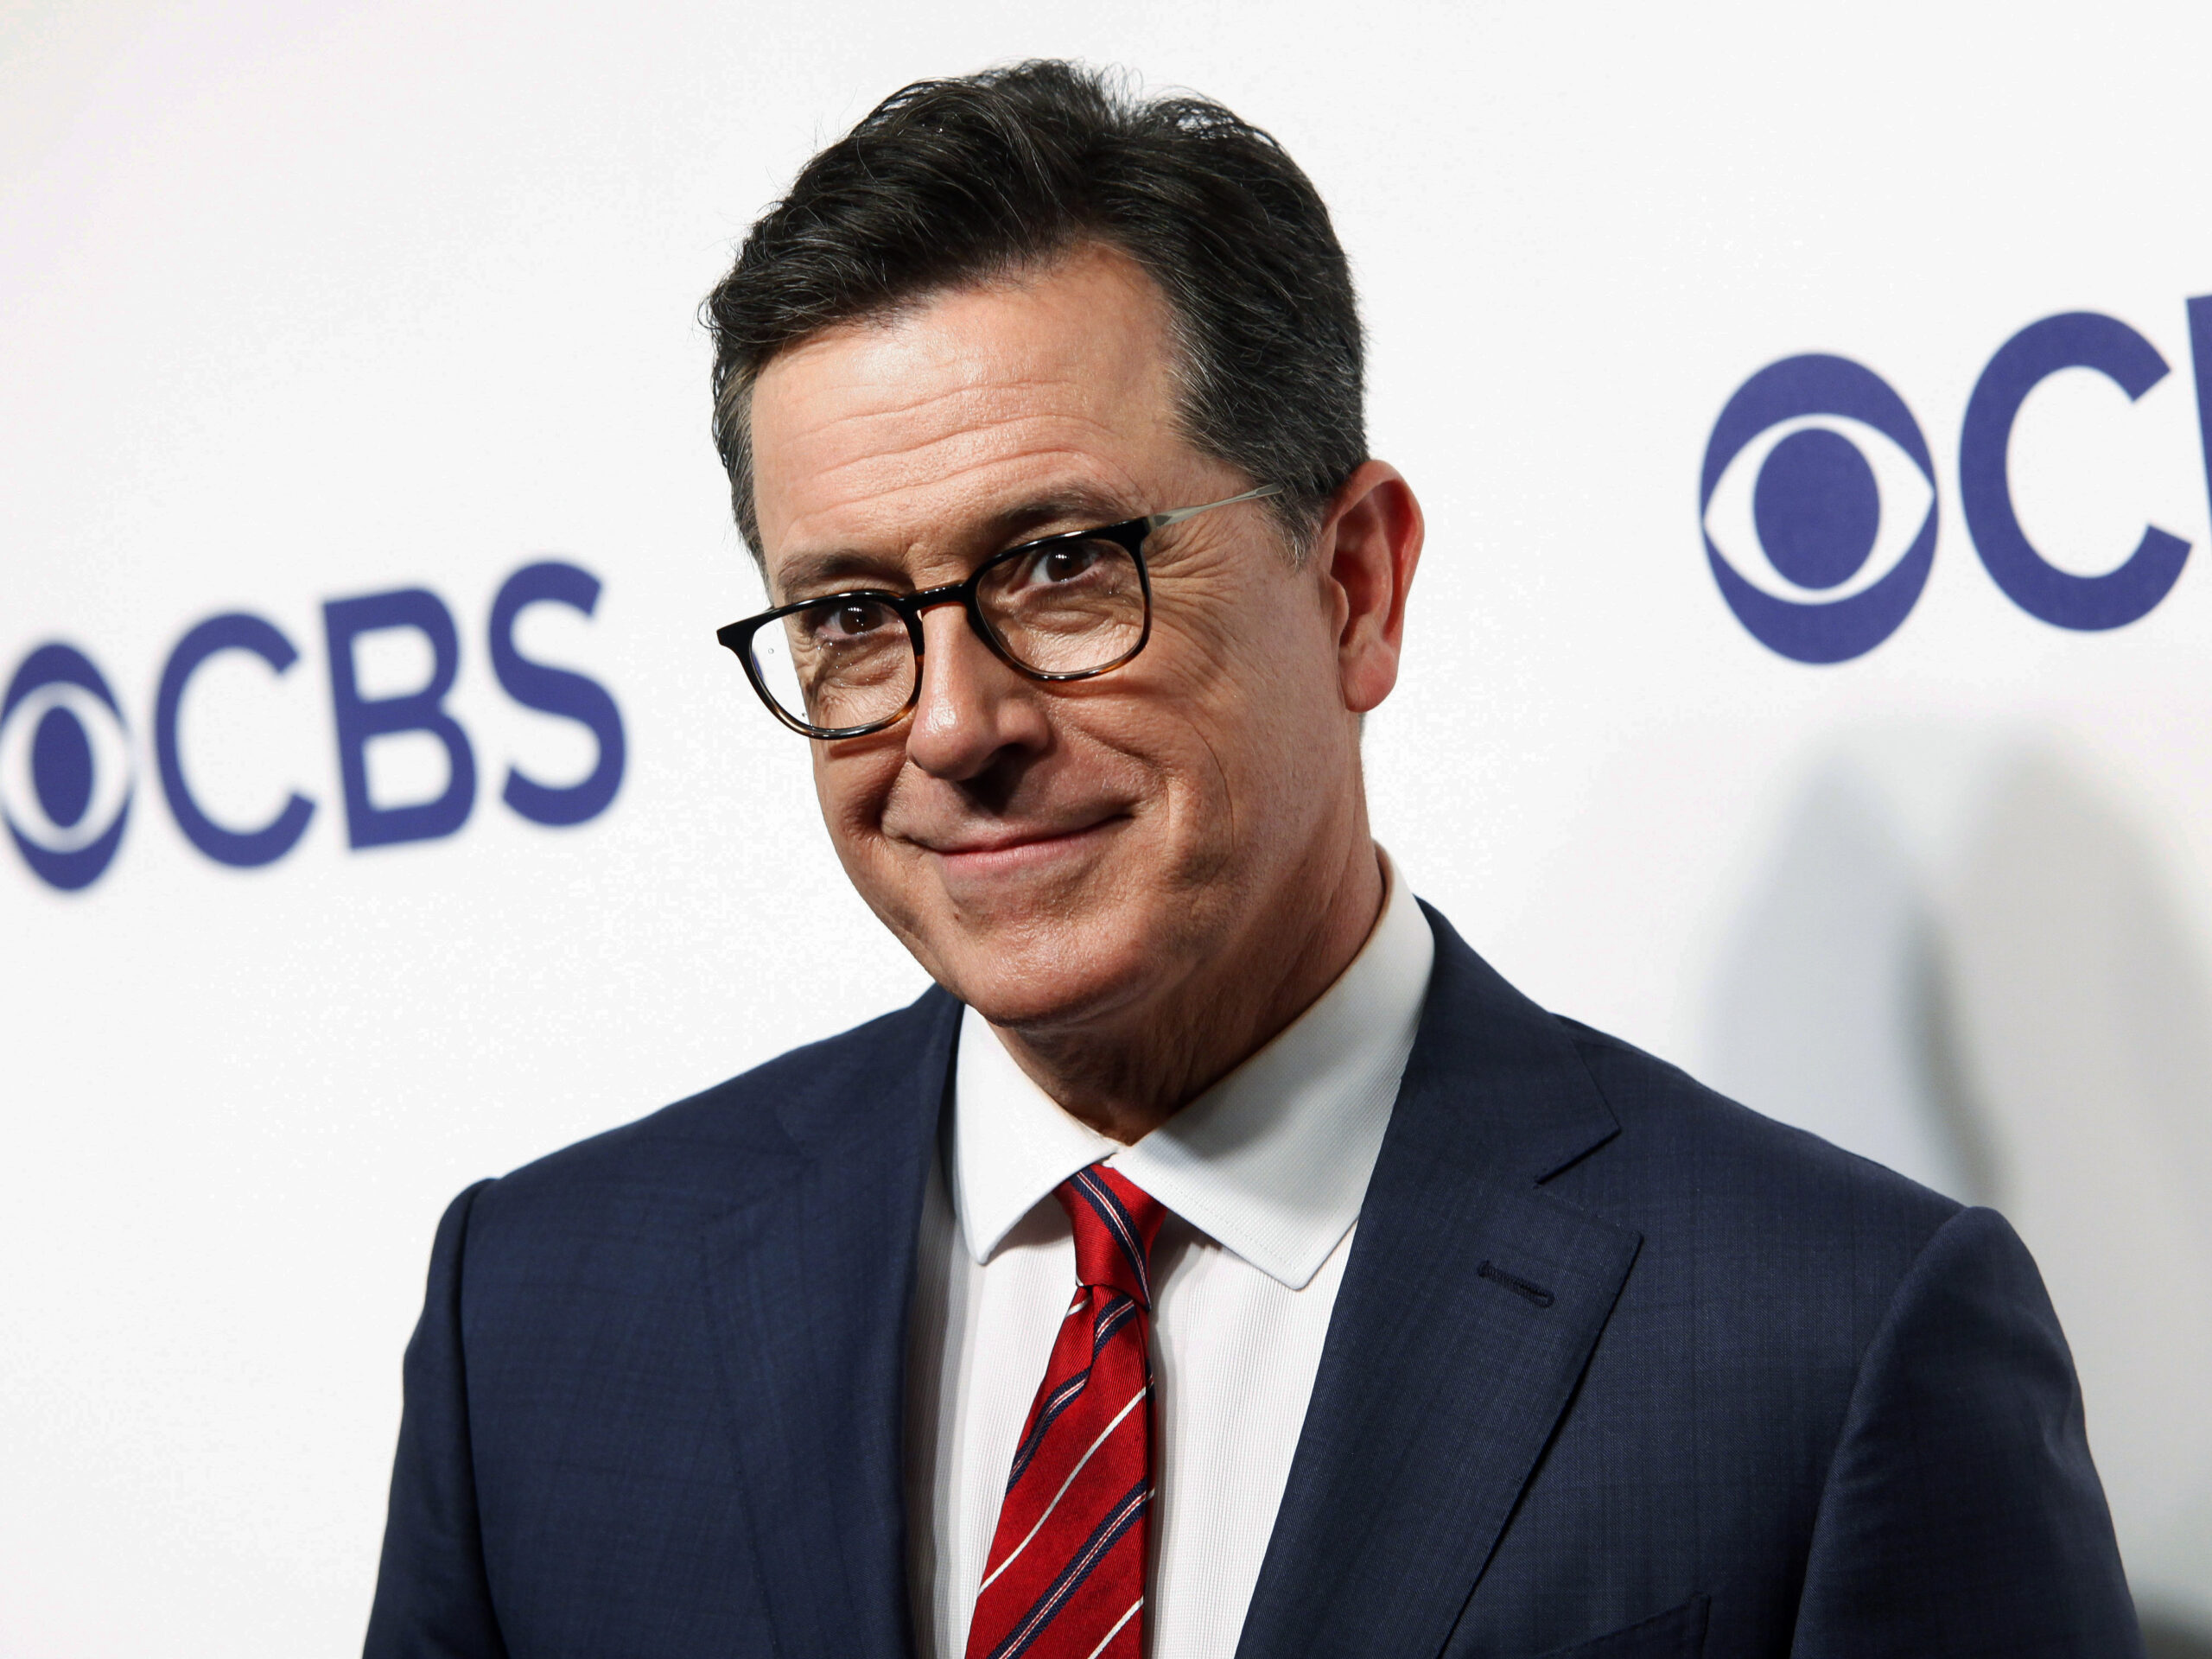 FILE - Stephen Colbert attends the CBS Network 2018 Upfront at The Plaza Hotel in New York on May 16, 2018. Colbert will return to doing live shows before a studio audience on June 14. CBS said Monday that audience members at the Ed Sullivan Theater in New York will be required to show proof of vaccination before being admitted, and face masks will be optional for them. (Photo by Andy Kropa/Invision/AP, File)